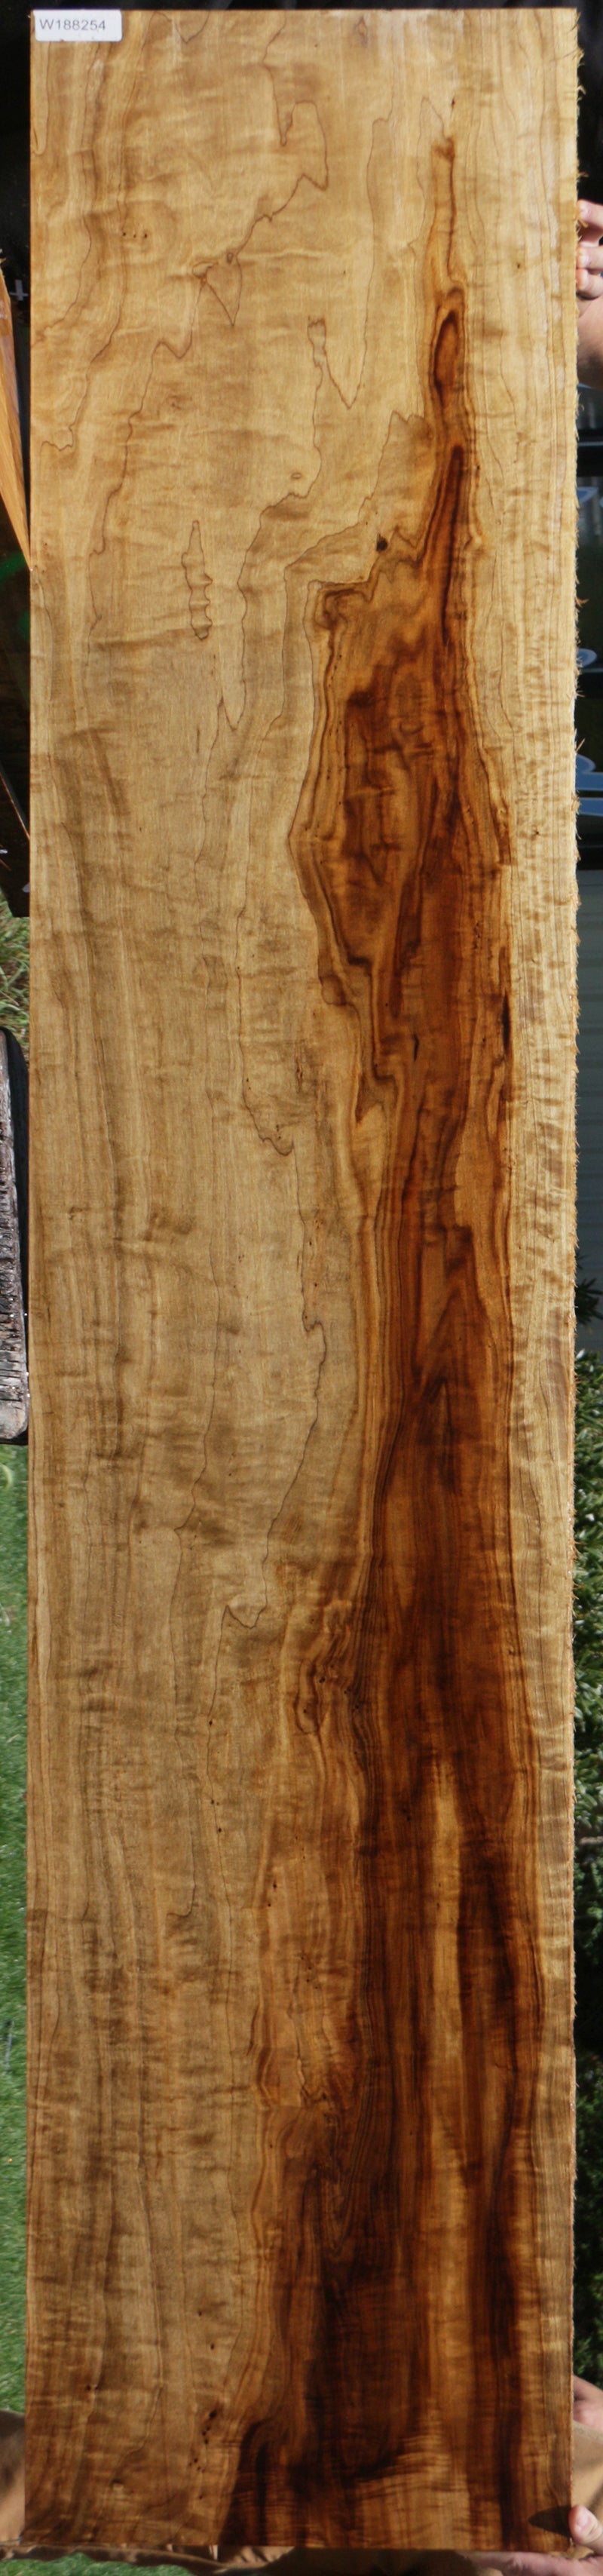 Extra Fancy Fiddleback French Poplar Lumber (Free Shipping Excluded)